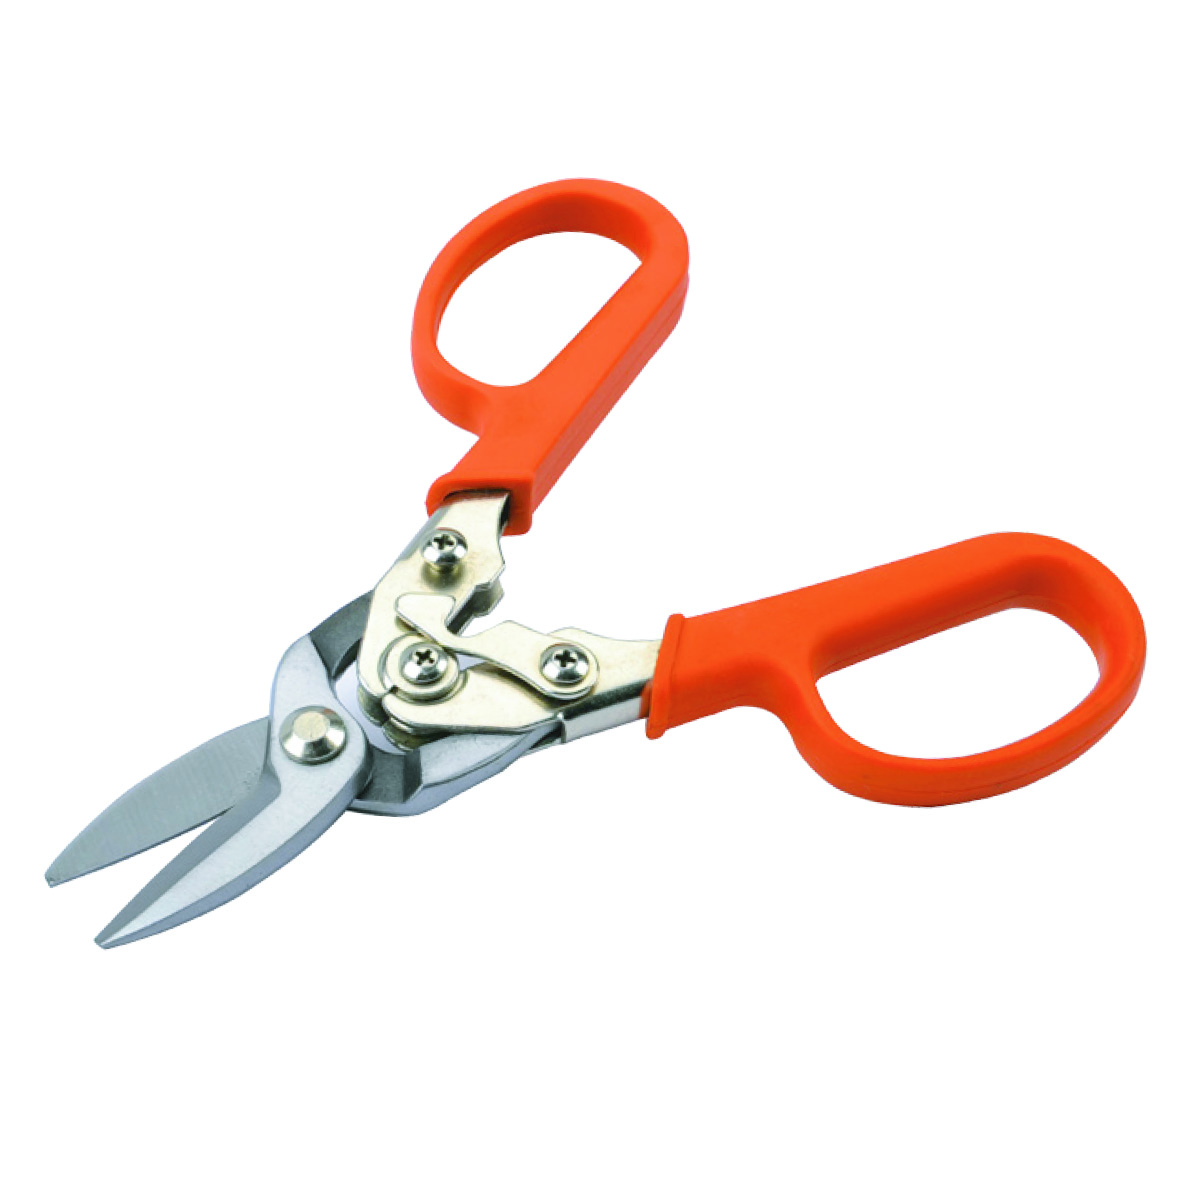 HIGH-LEVERAGE ALL-PURPOSE SNIPS